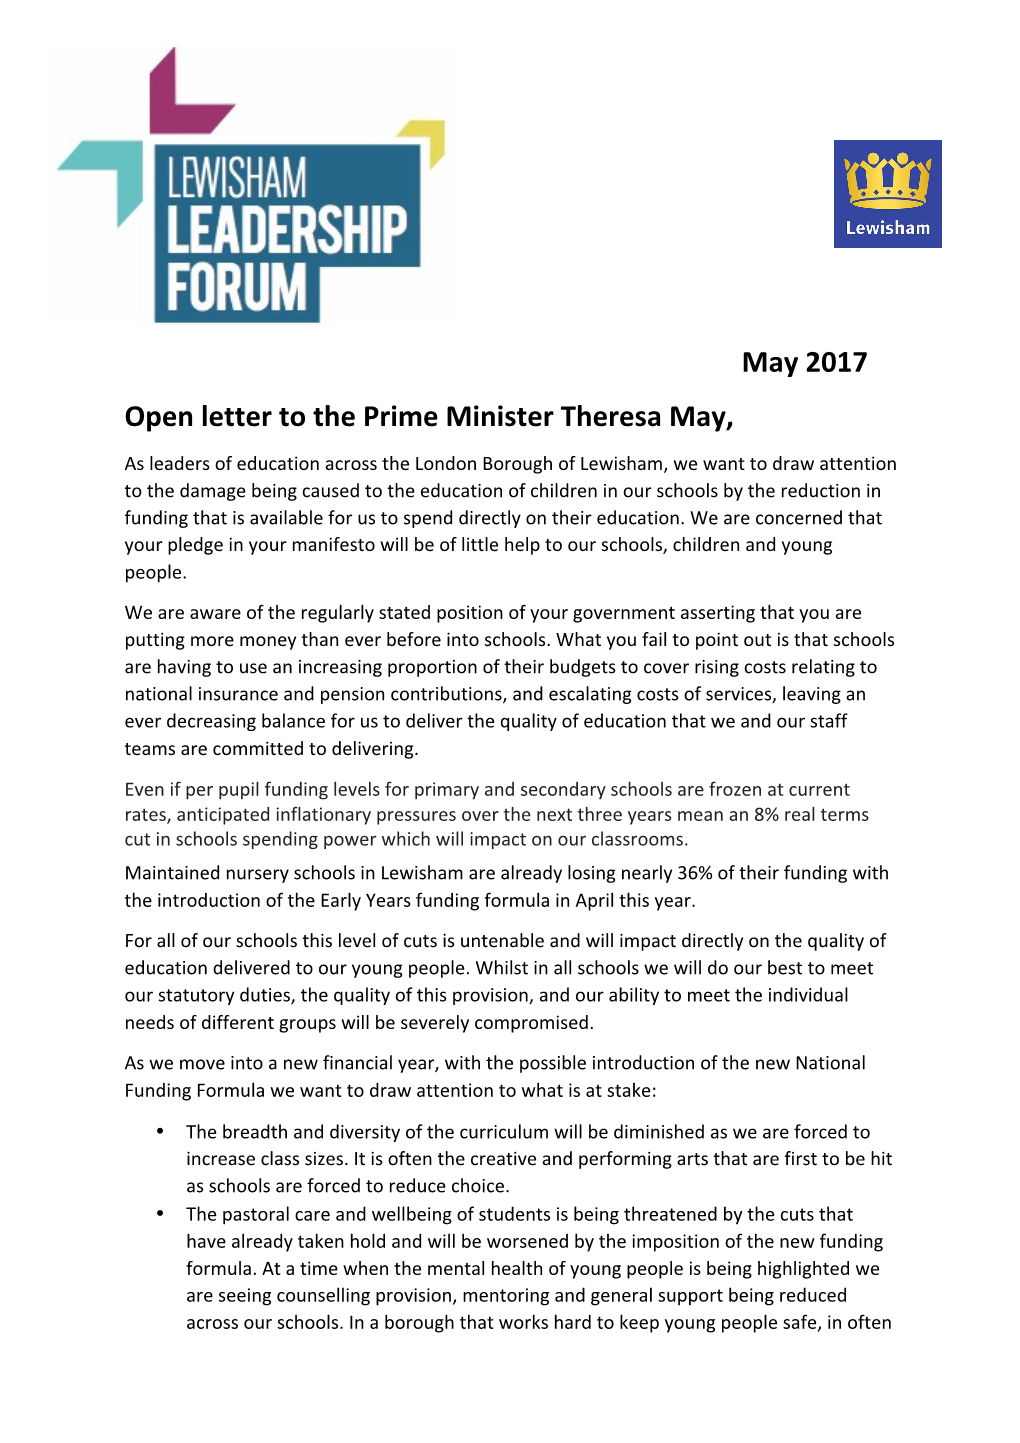 May 2017 Open Letter to the Prime Minister Theresa May